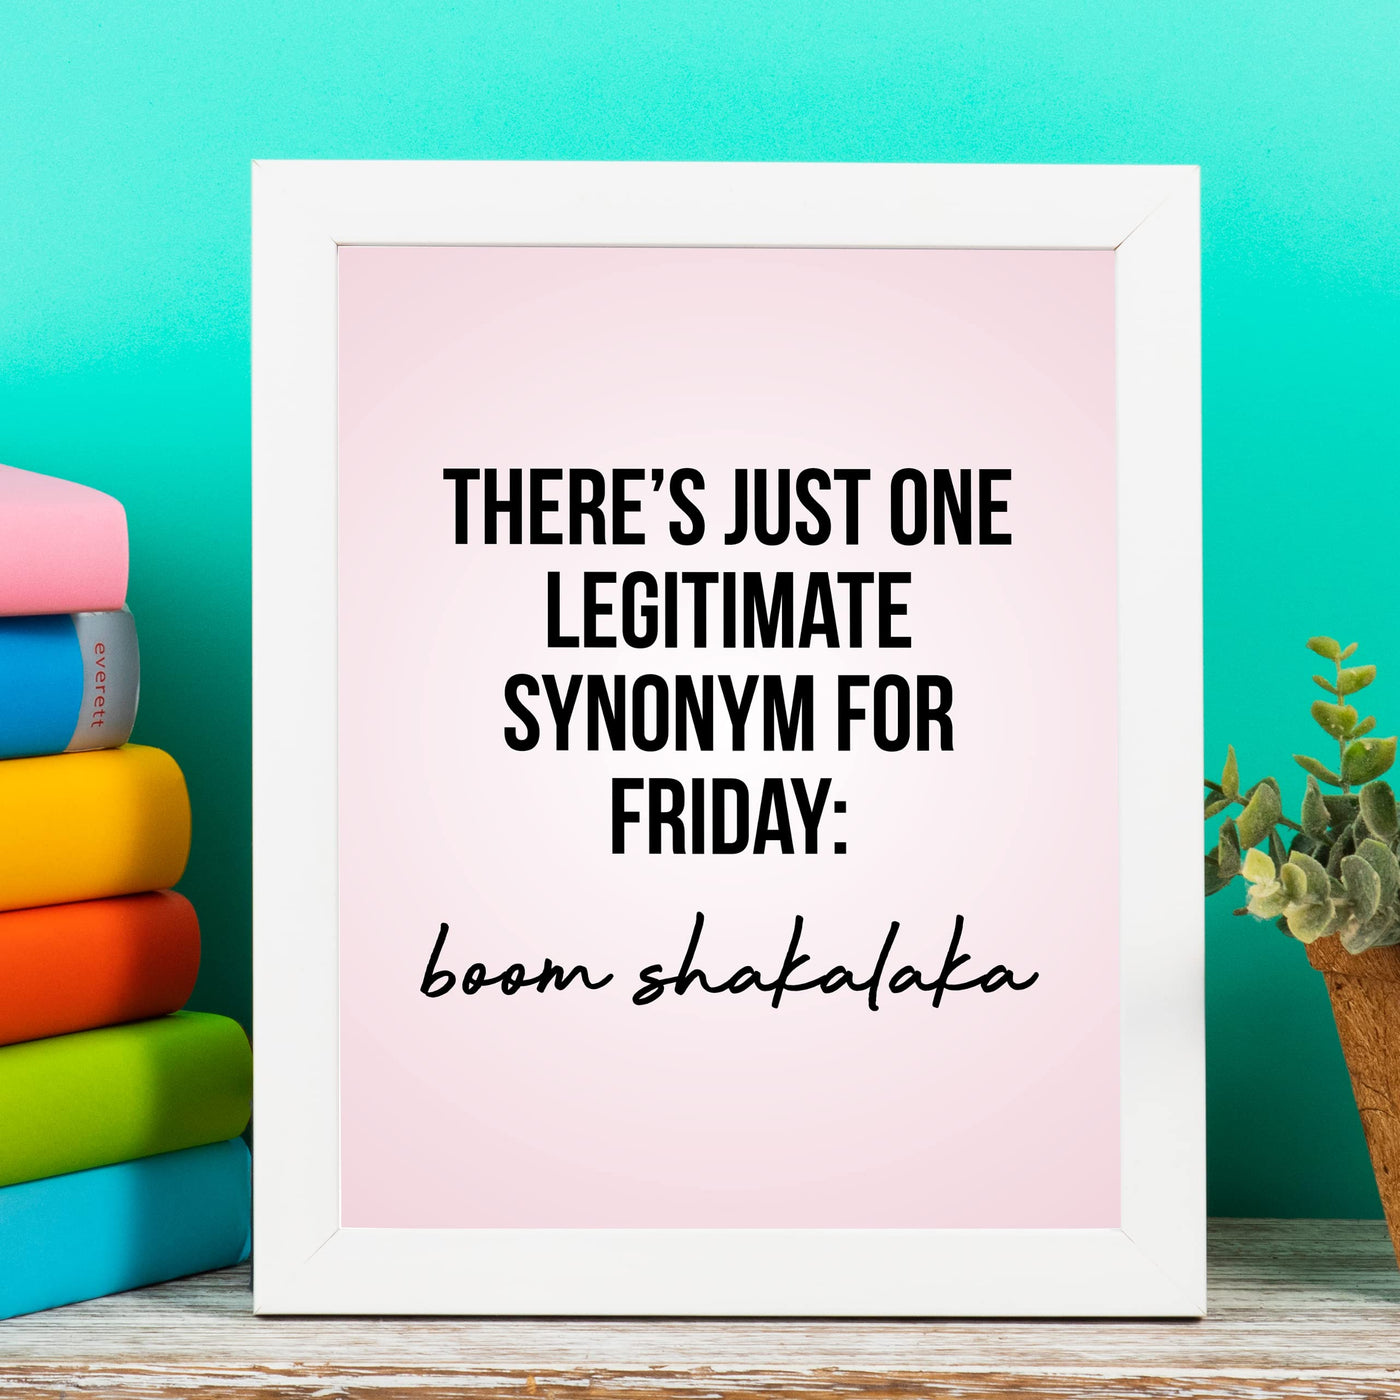 One Synonym for Friday-Boom Shakalaka Funny Office Wall Decor Sign -8 x 10" Typography Art Print -Ready to Frame. Humorous Decoration for Home-Office-Shop-Cave Decor. Perfect Desk-Cubicle Sign!